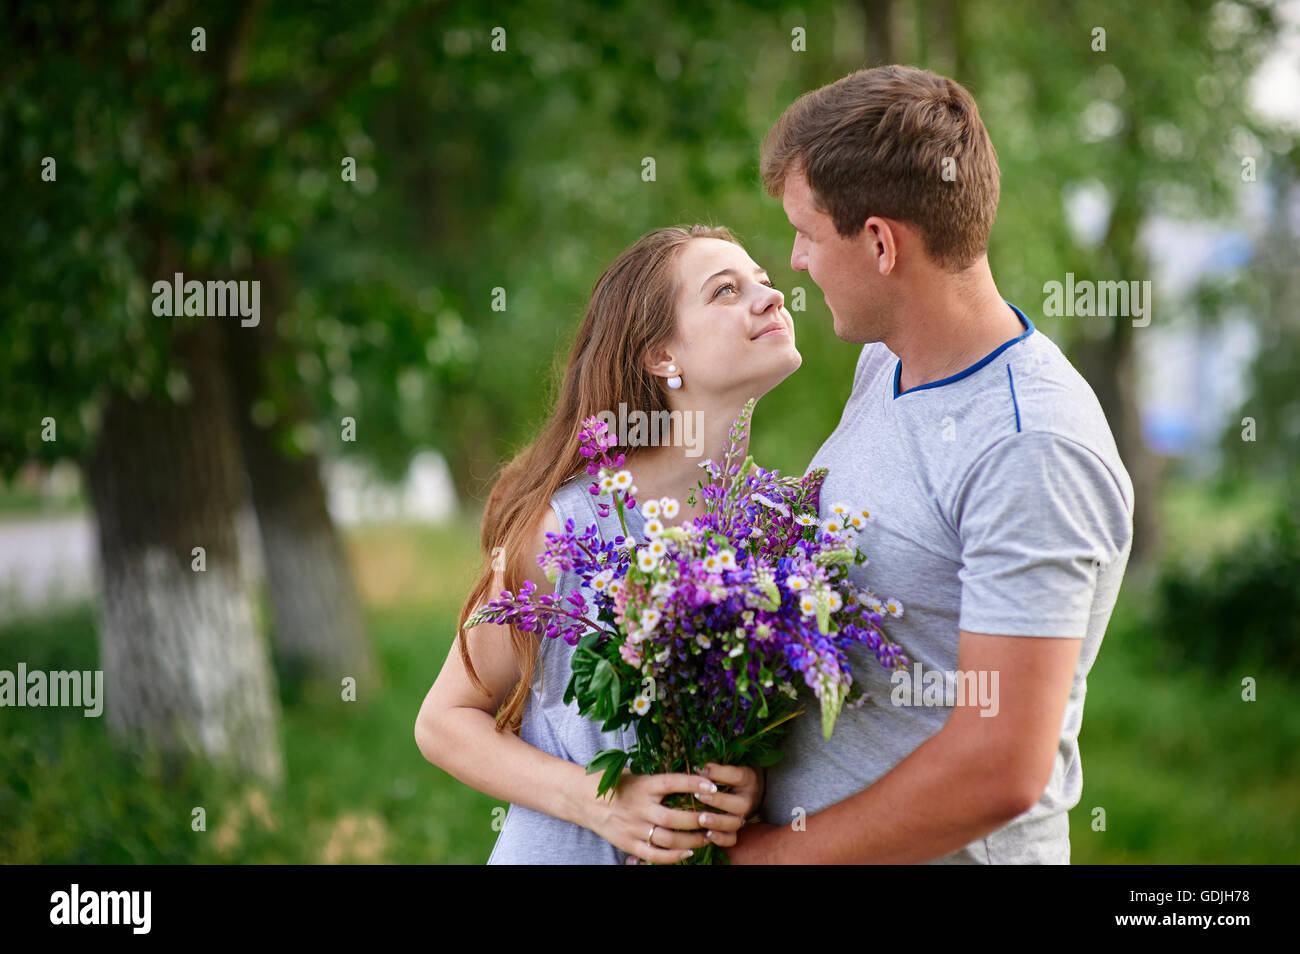 man and woman meet in park with bunch of flowers Stock Photo